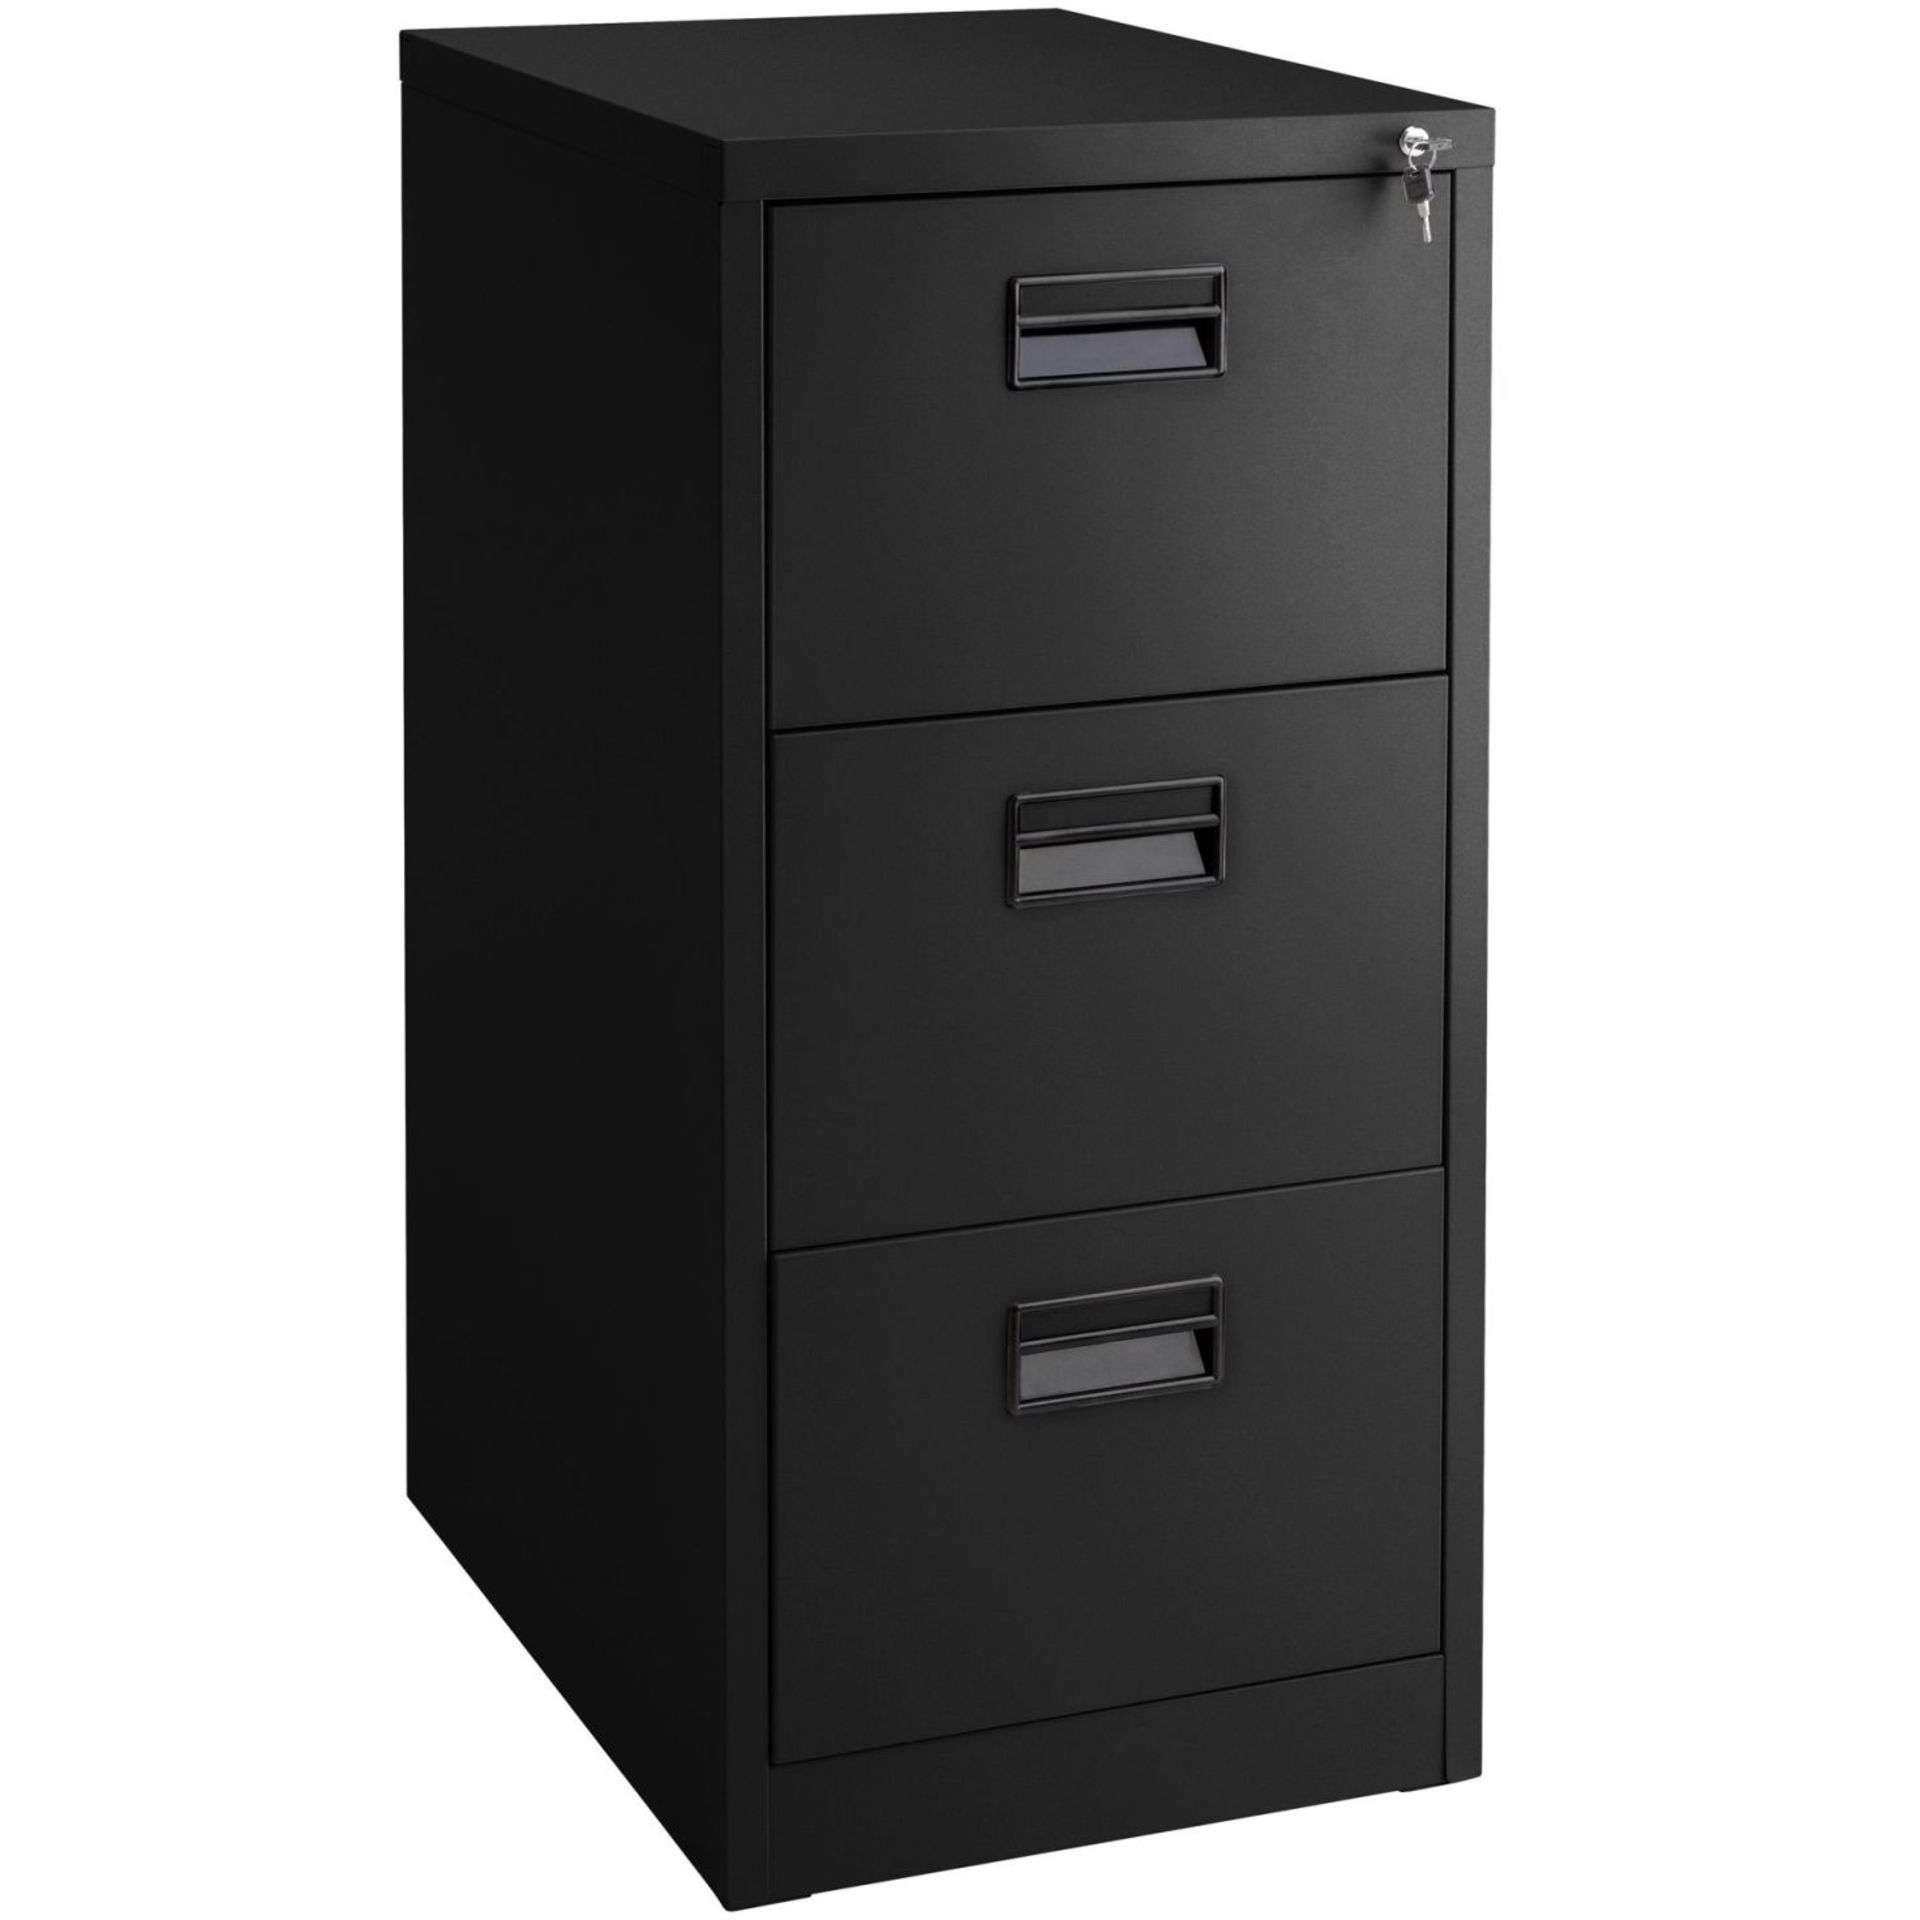 Tectake - Filing Cabinet With 3 Shelves Black - Boxed. RRP £159.99